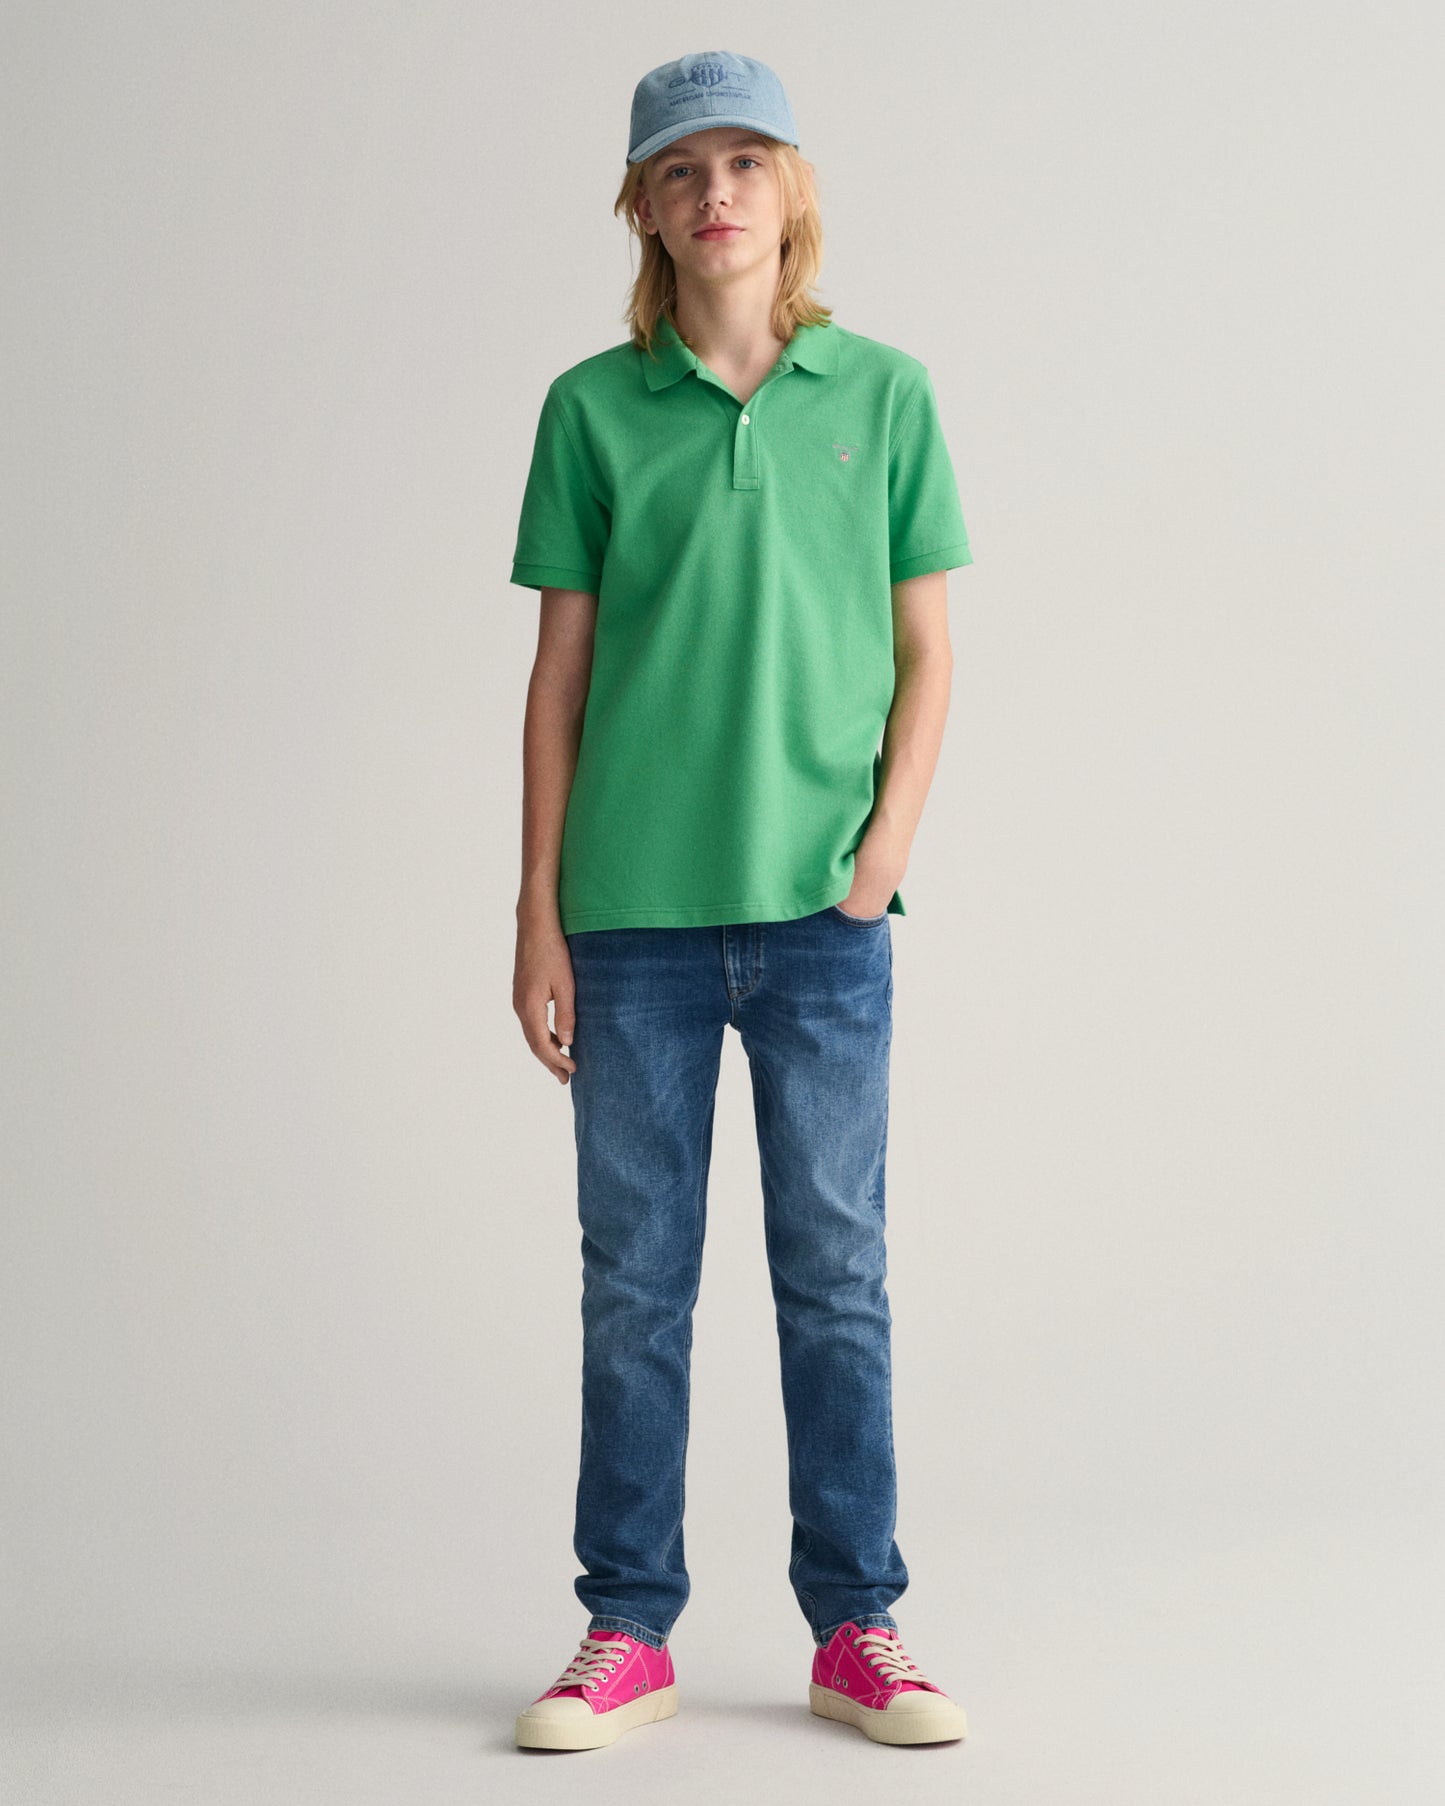 GANT GARDIEN ZERO THE ICON EDITION JEANS JUNIOR - Only Rugby